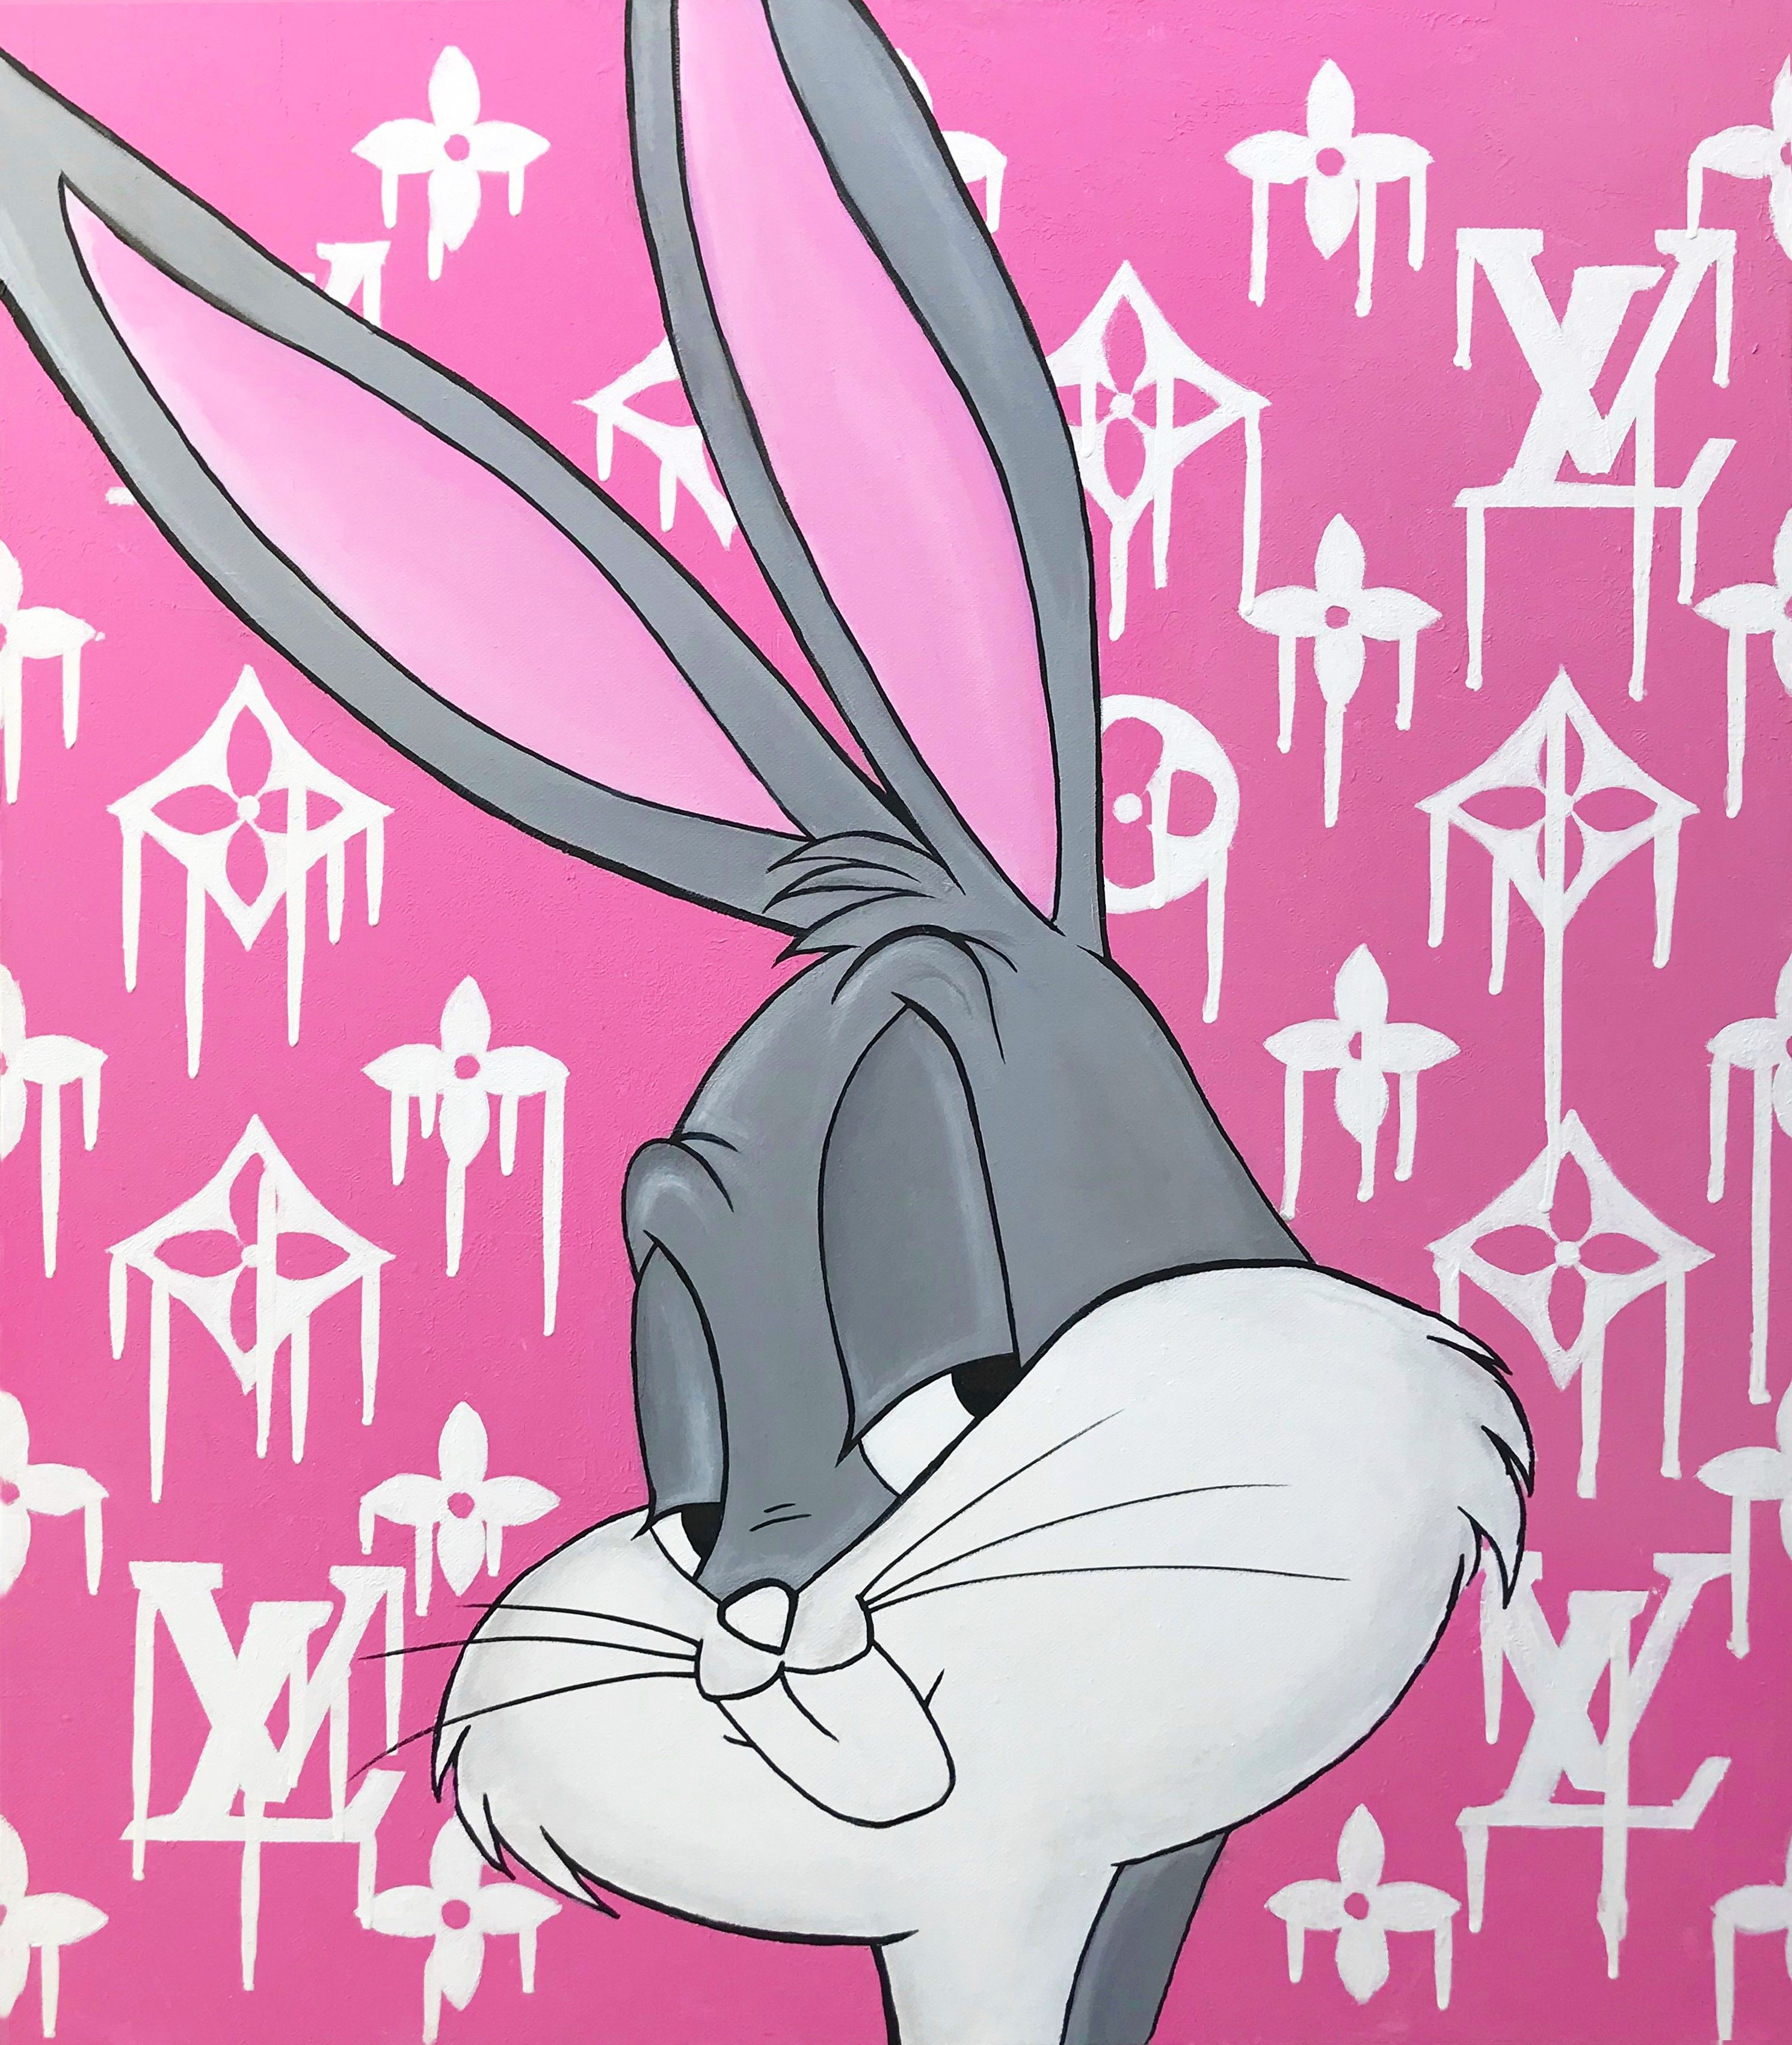 A cartoon rabbit with big ears is on pink background - Bugs Bunny